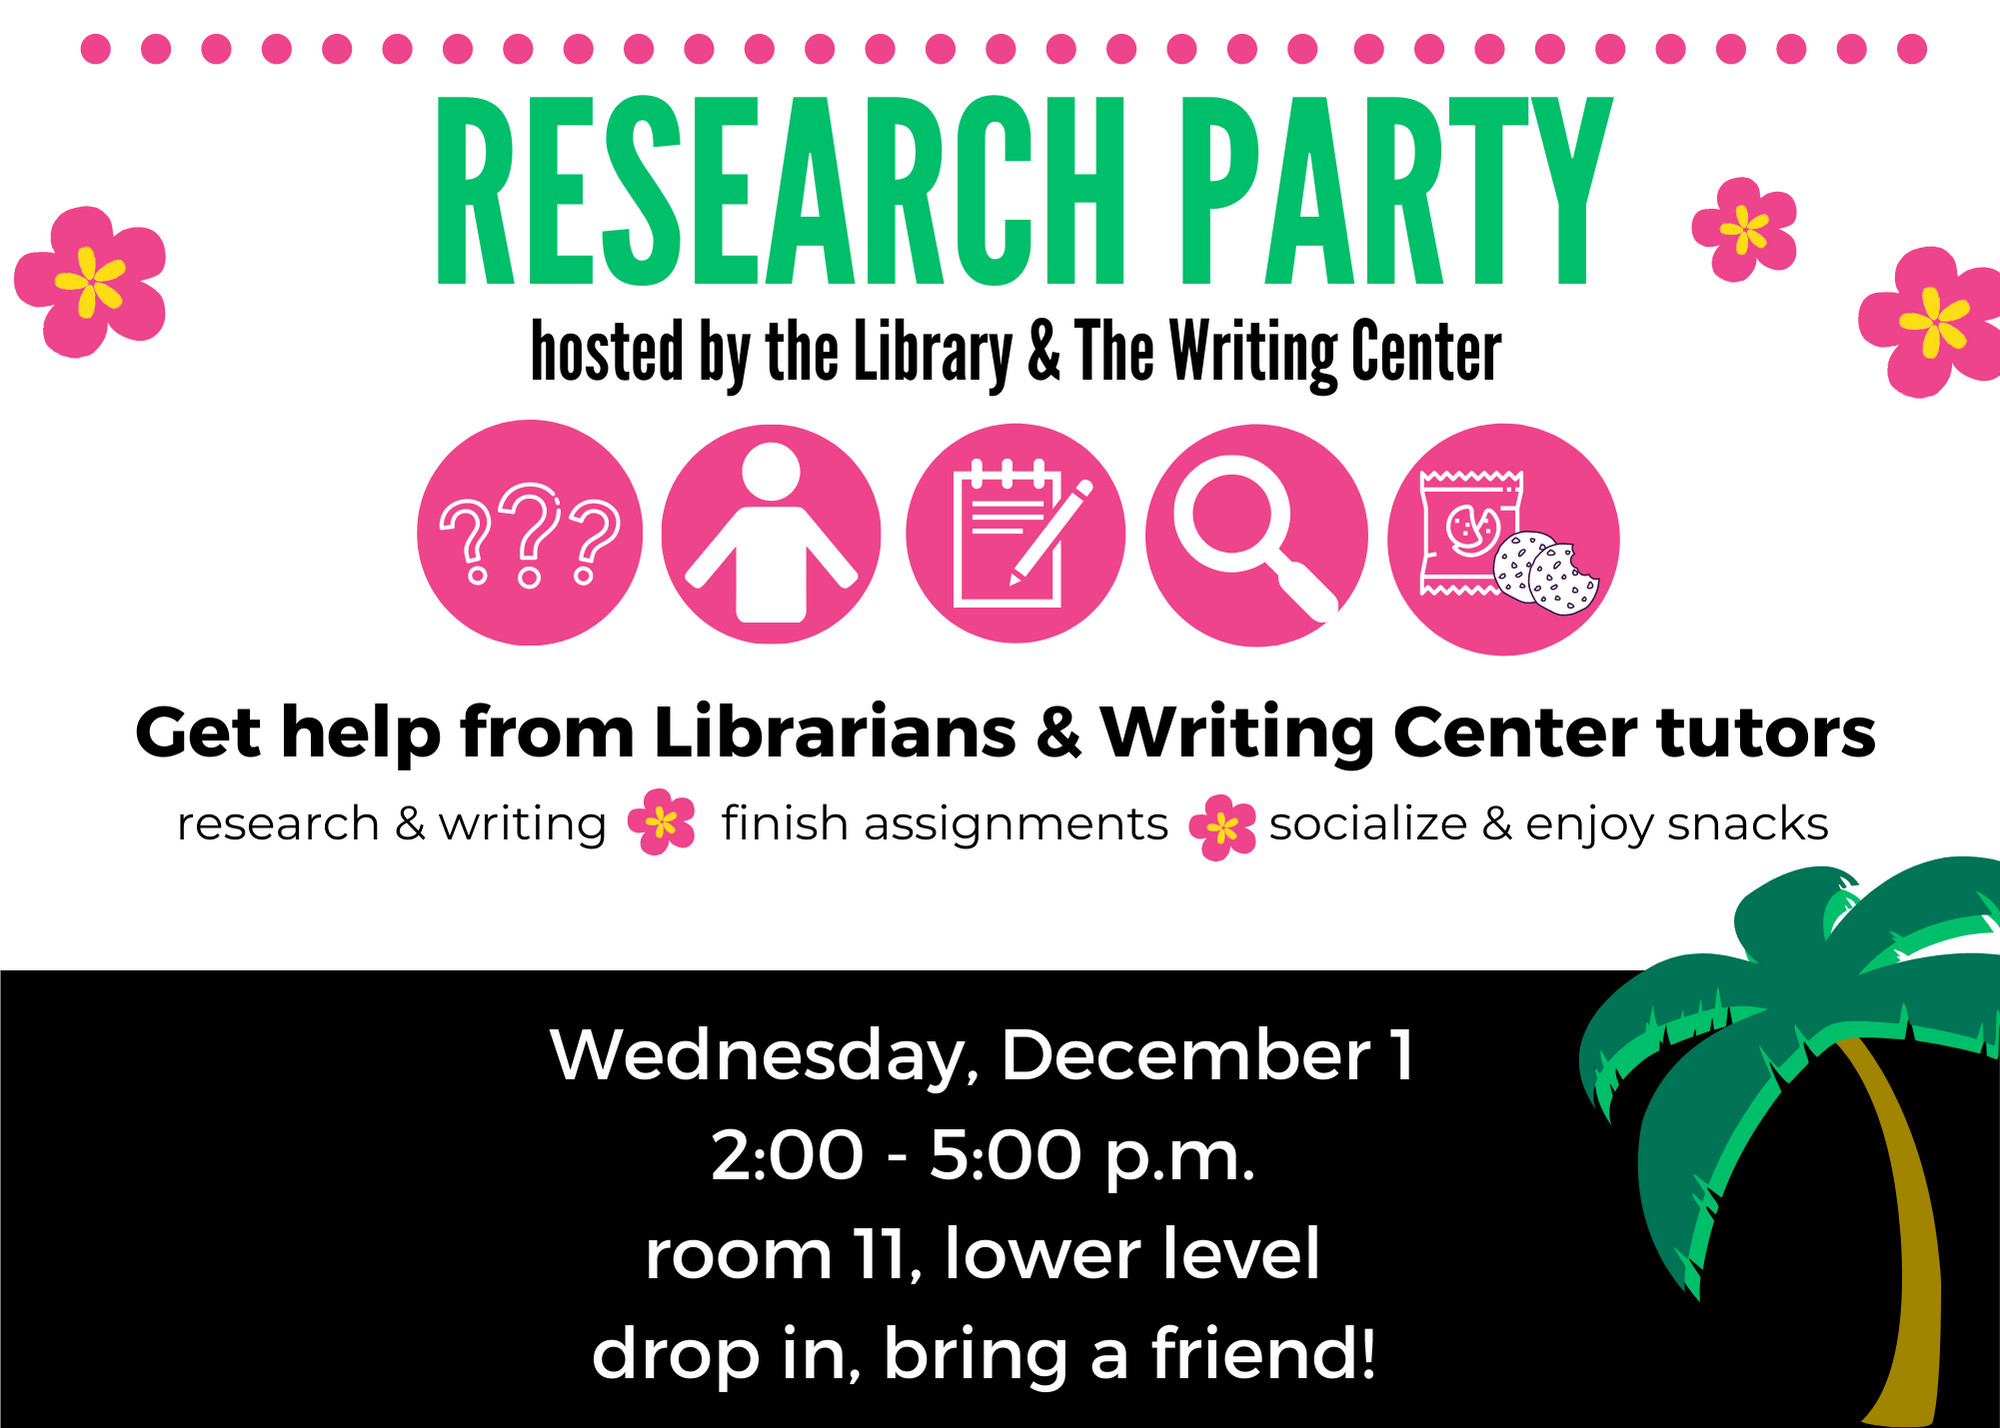 you're invited to a research party on December 1 with librarians and Writing Center tutors